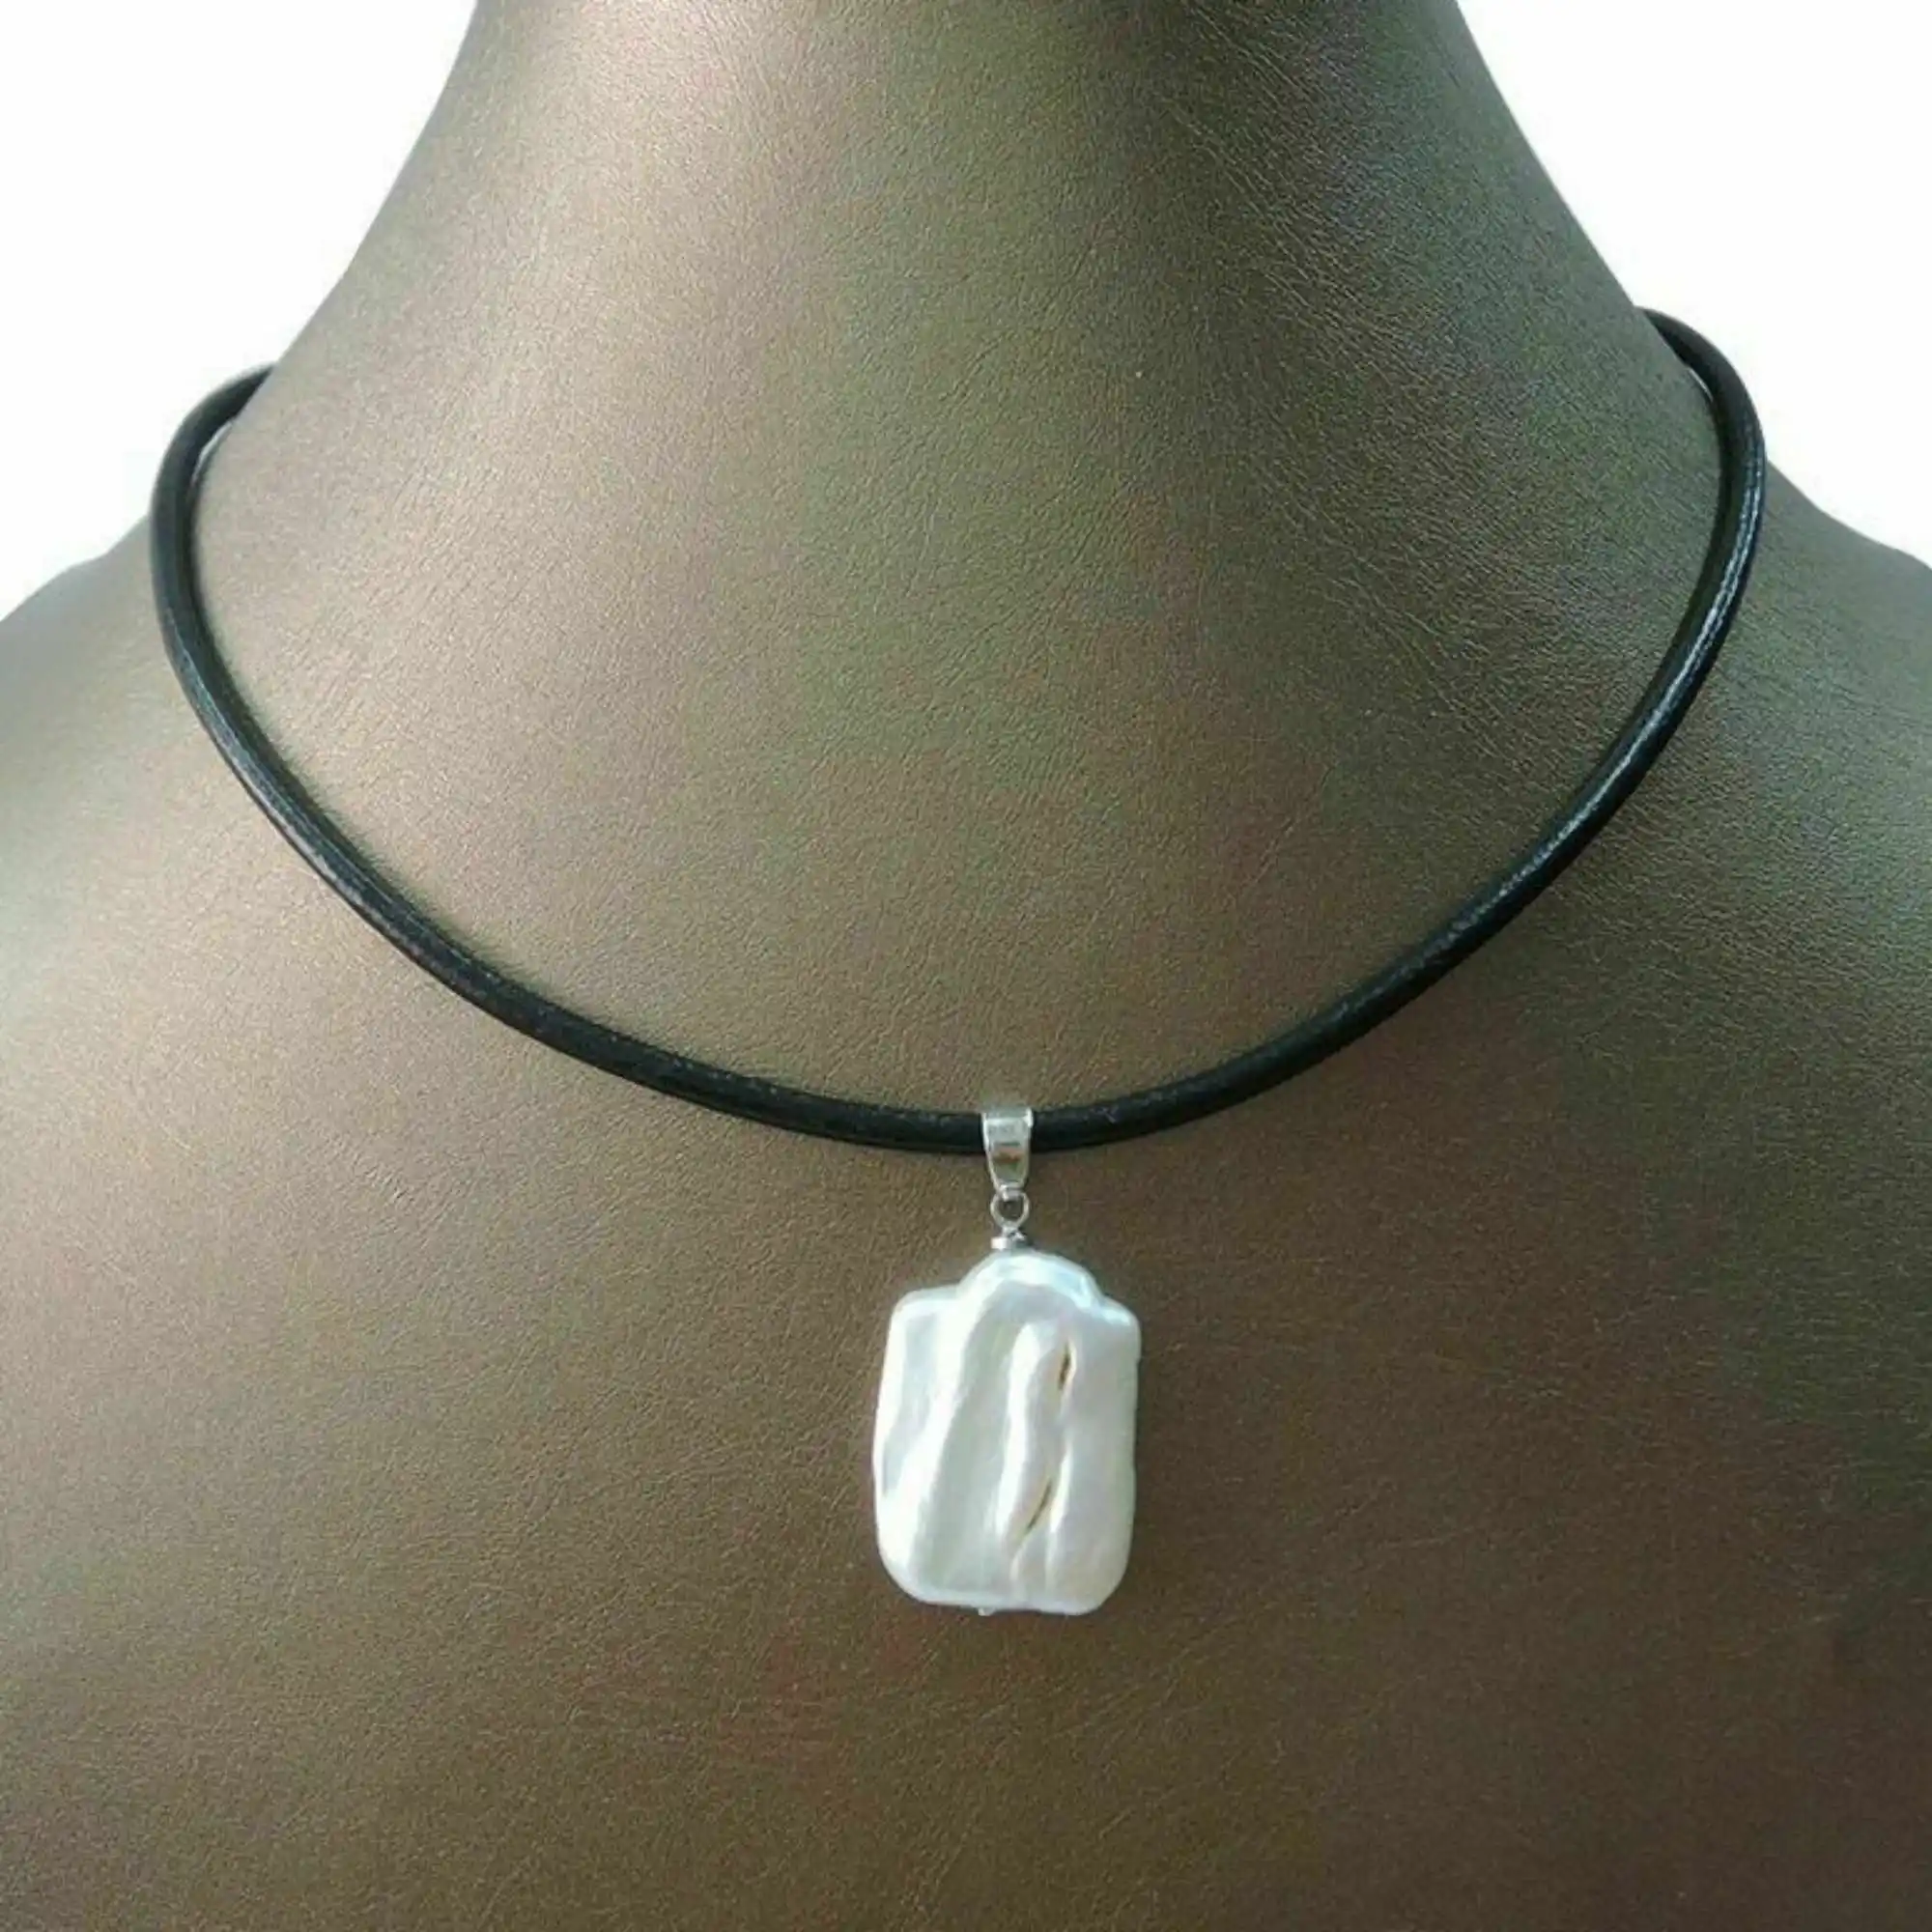 

17x21mm Rectangle Baroque Nature Freshwater Pearl Pendant Necklace Healing Reiki Craft Unisex Gemstone Beads Stainless Women New